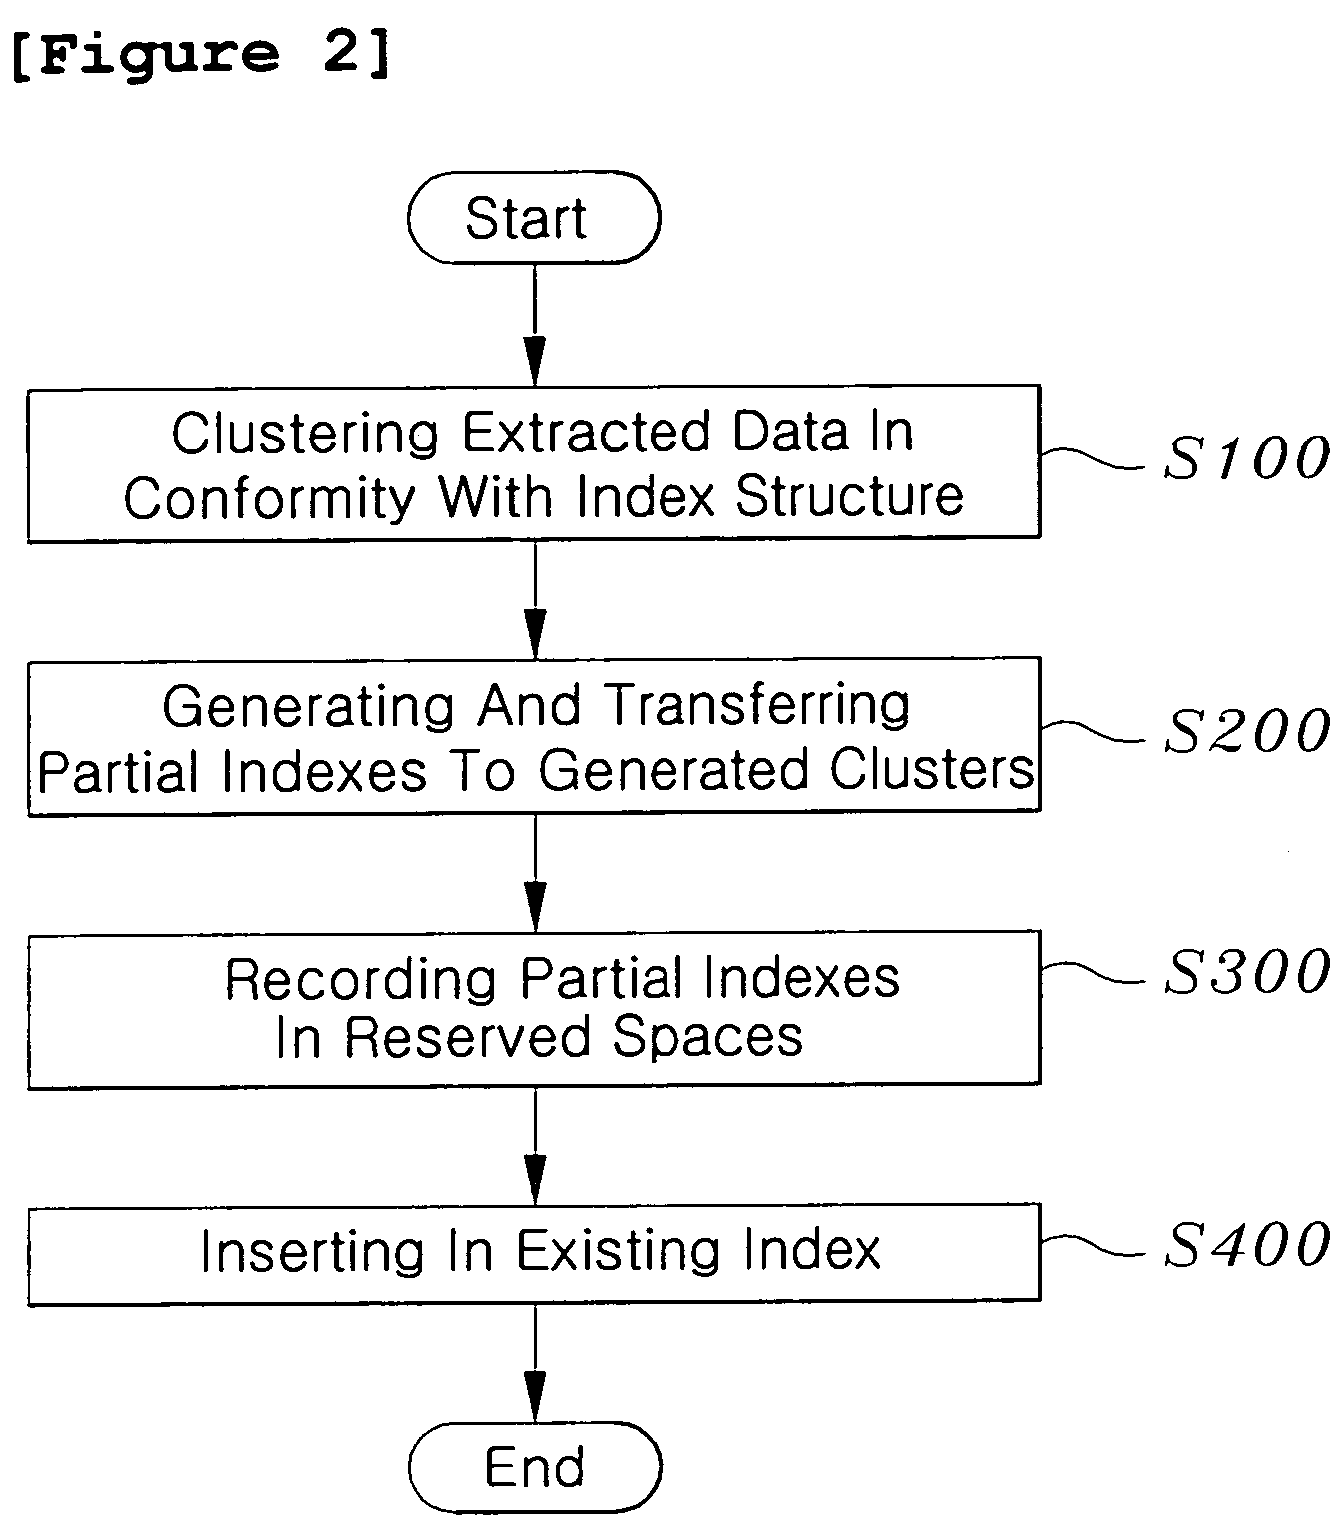 System and method for index reorganization using partial index transfer in spatial data warehouse